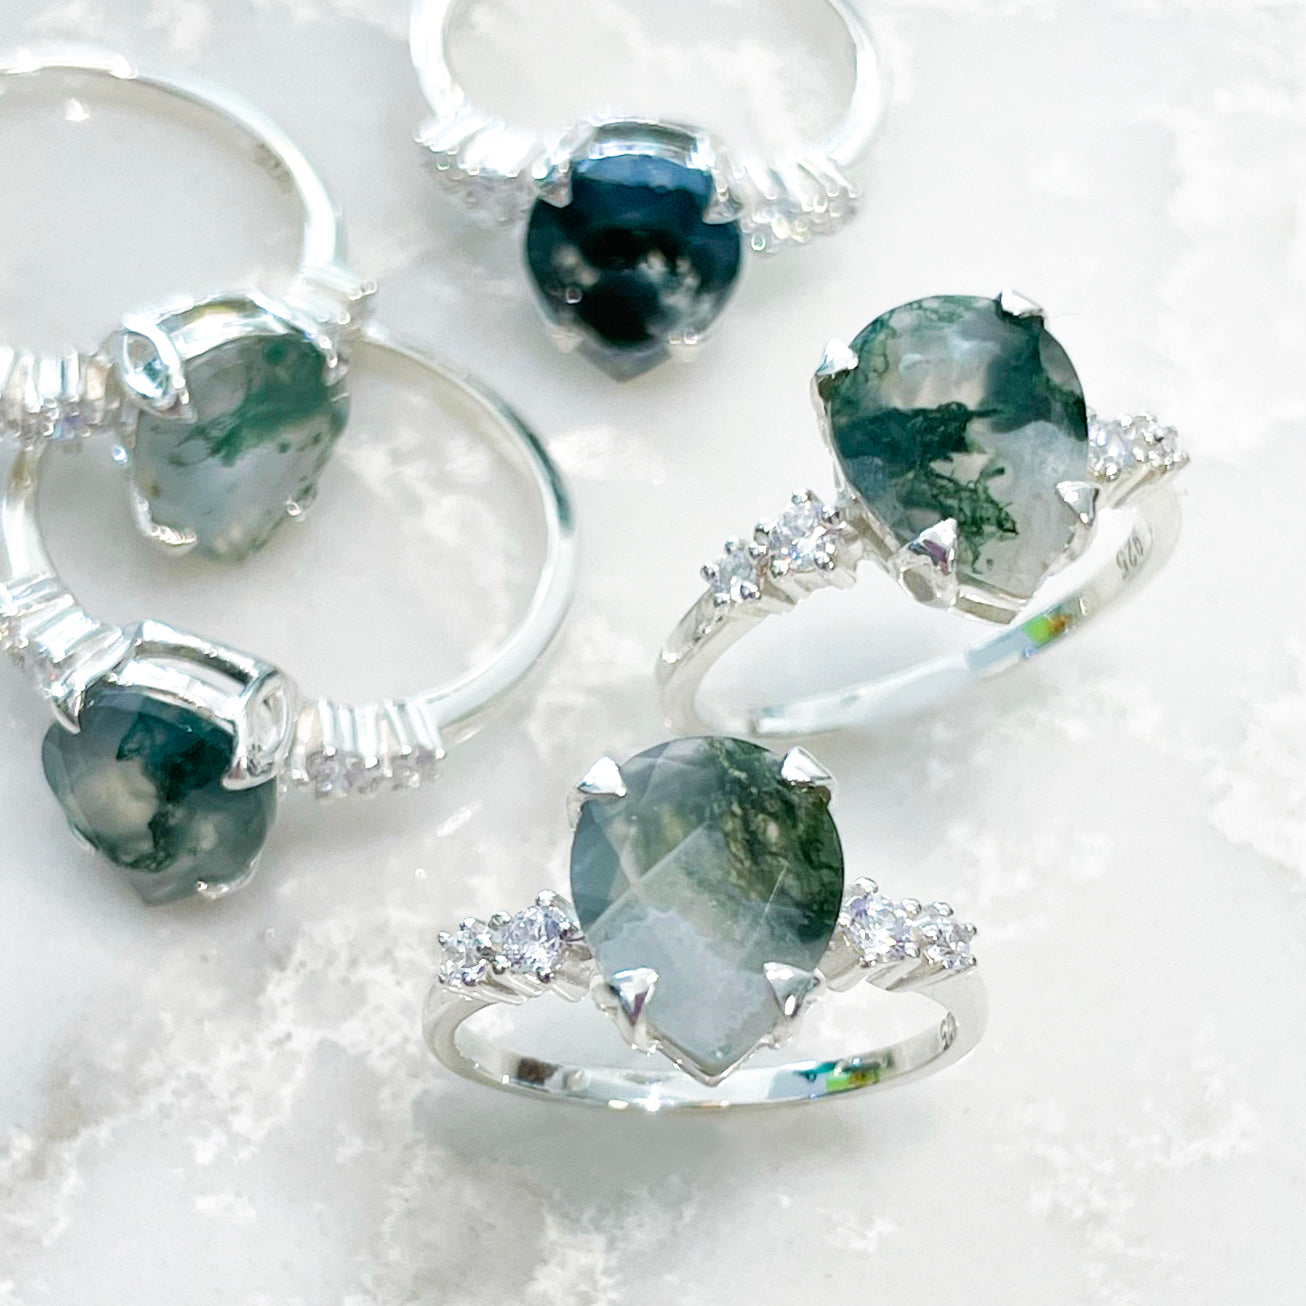 Fern Ring - Moss Agate and White Topaz